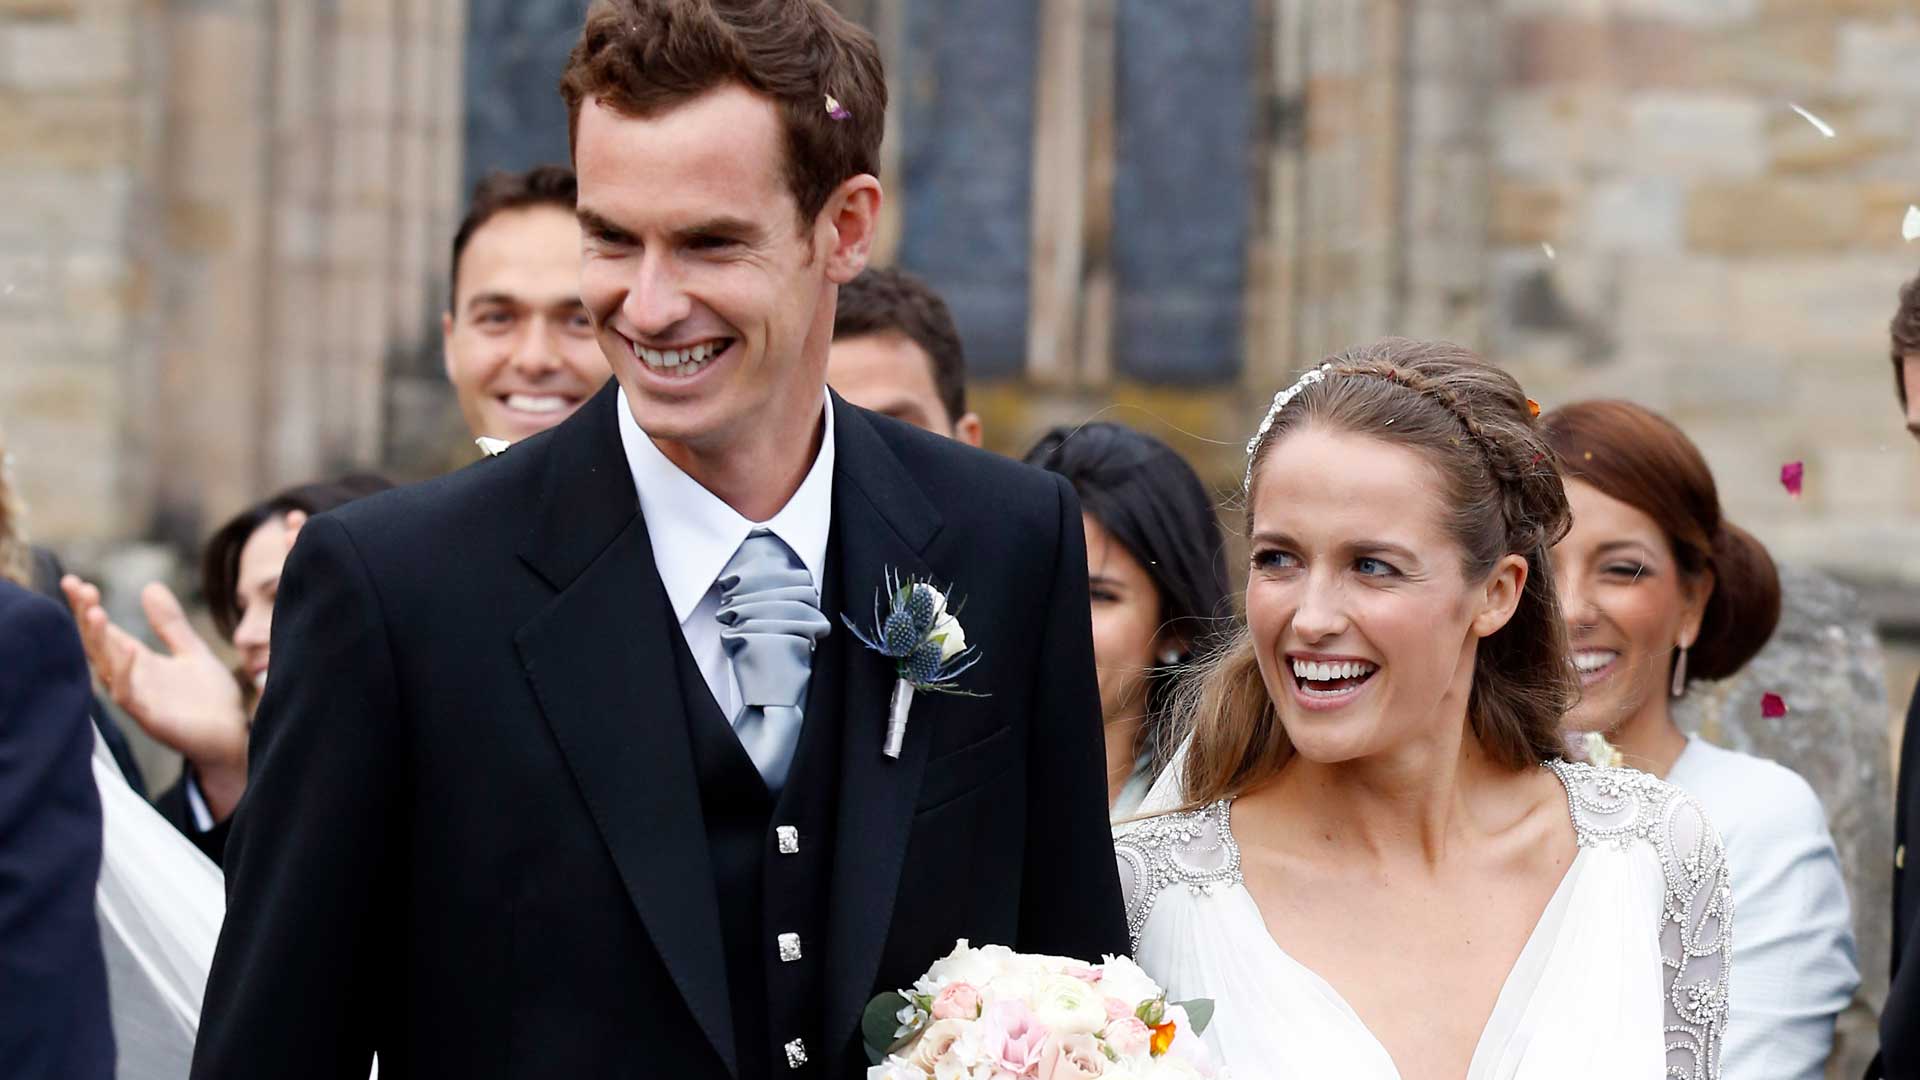 a href='https://www.atptour.com/en/players/andy-murray/mc10/overview'Andy Murray/a, Kim Sears